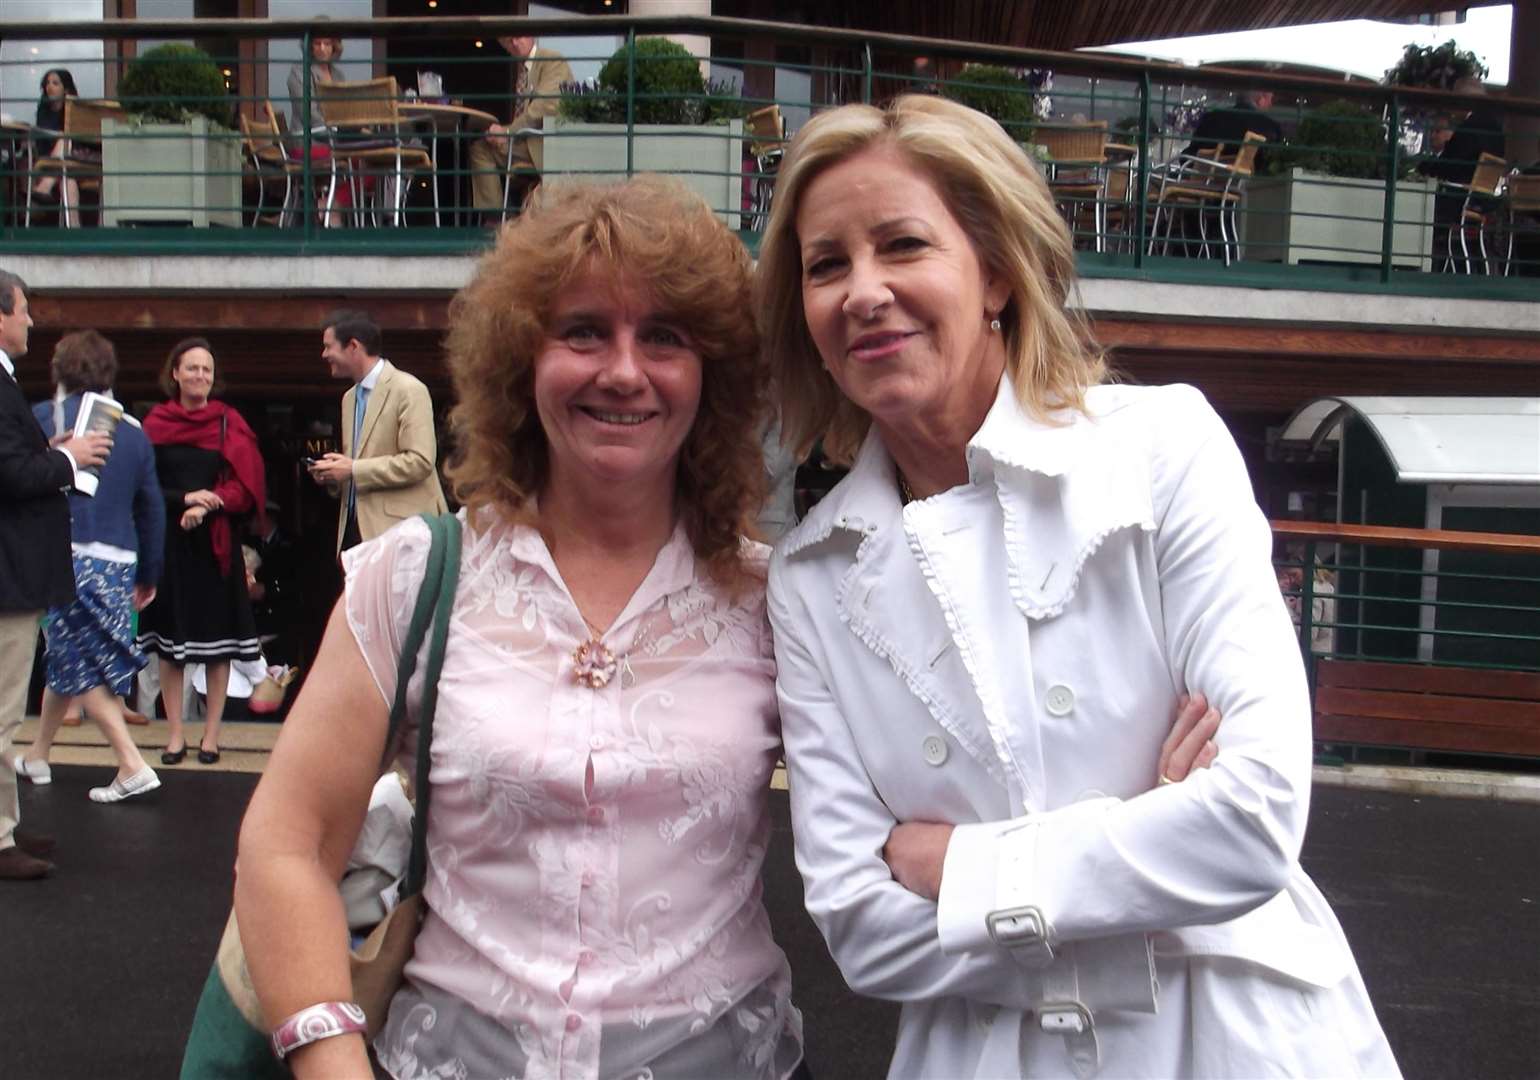 Former Wimbledon champion Chris Evert was someone Vanessa Webb admired as she grew up. Pictured with her in 2014.